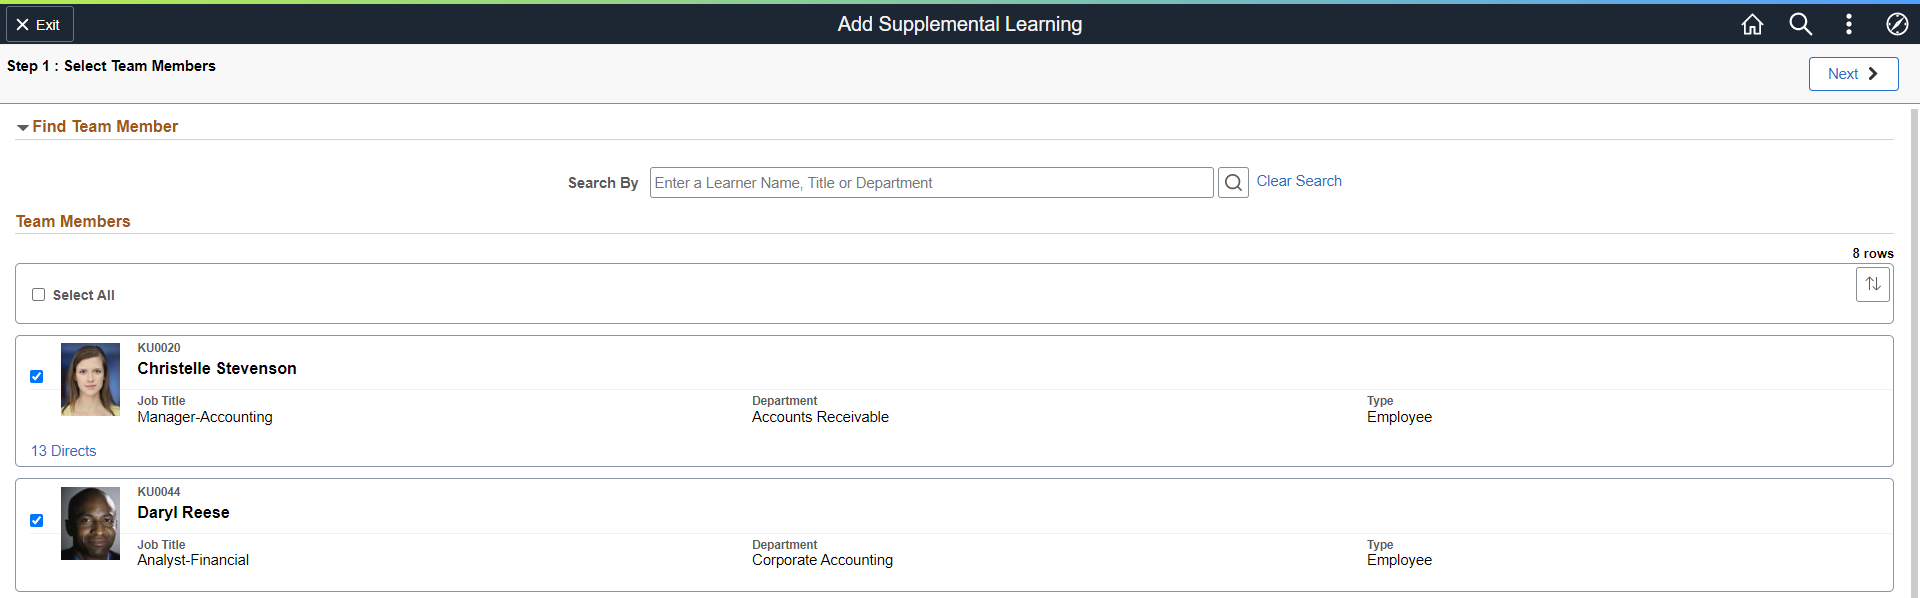 Step 2 of Add Supplemental Learning (Multiple Learners)